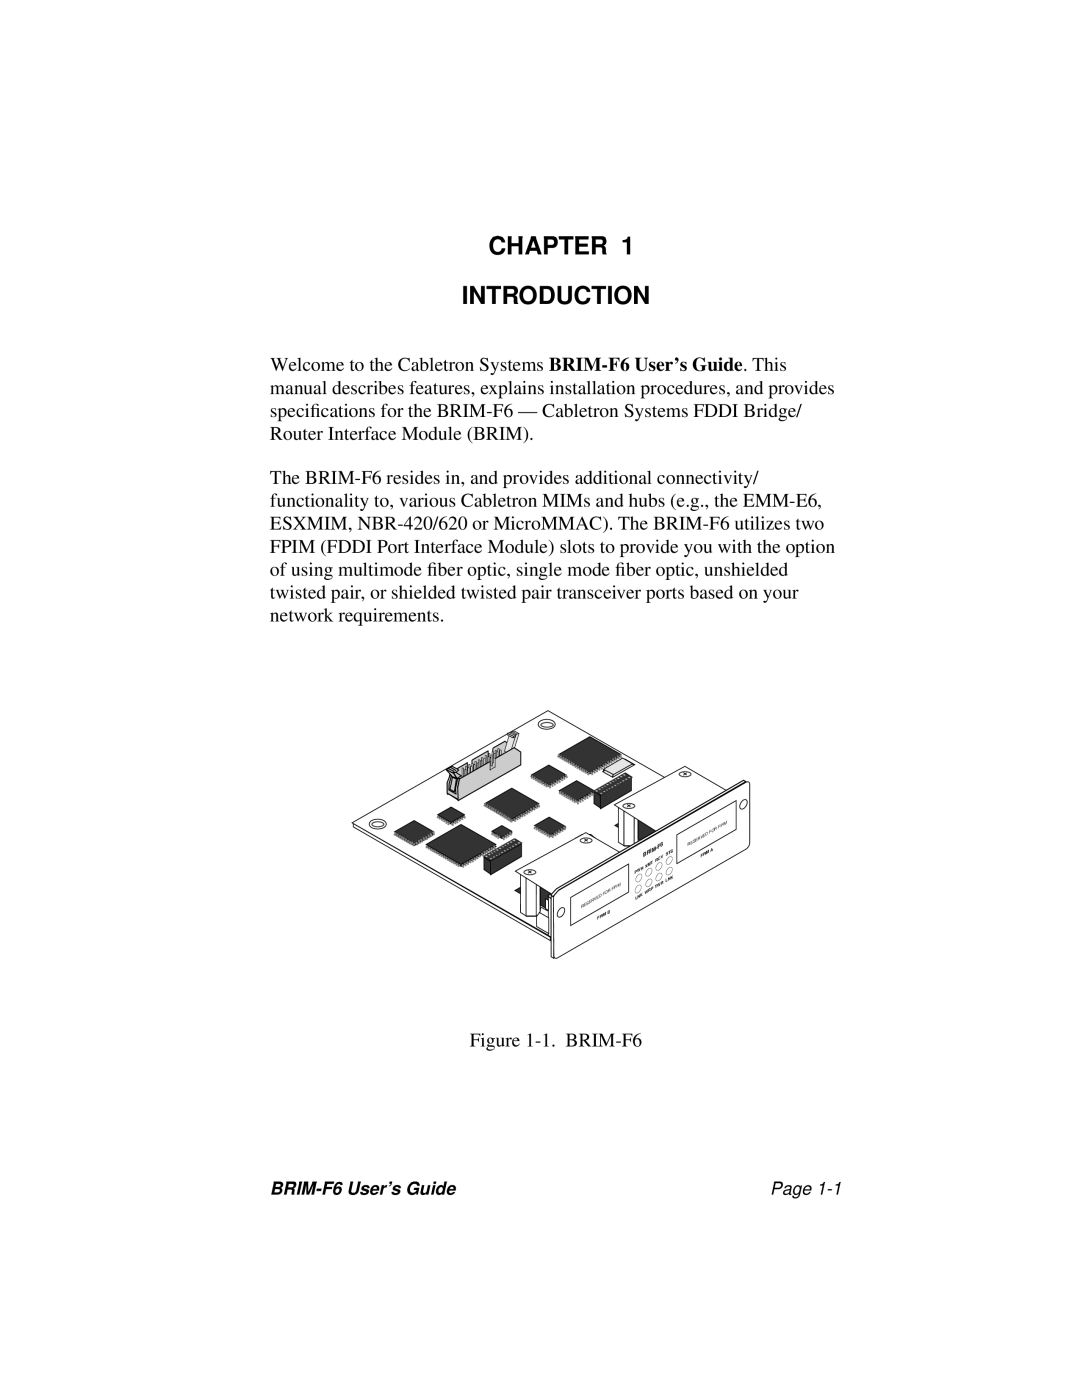 Cabletron Systems BRIM-F6 manual Chapter Introduction 